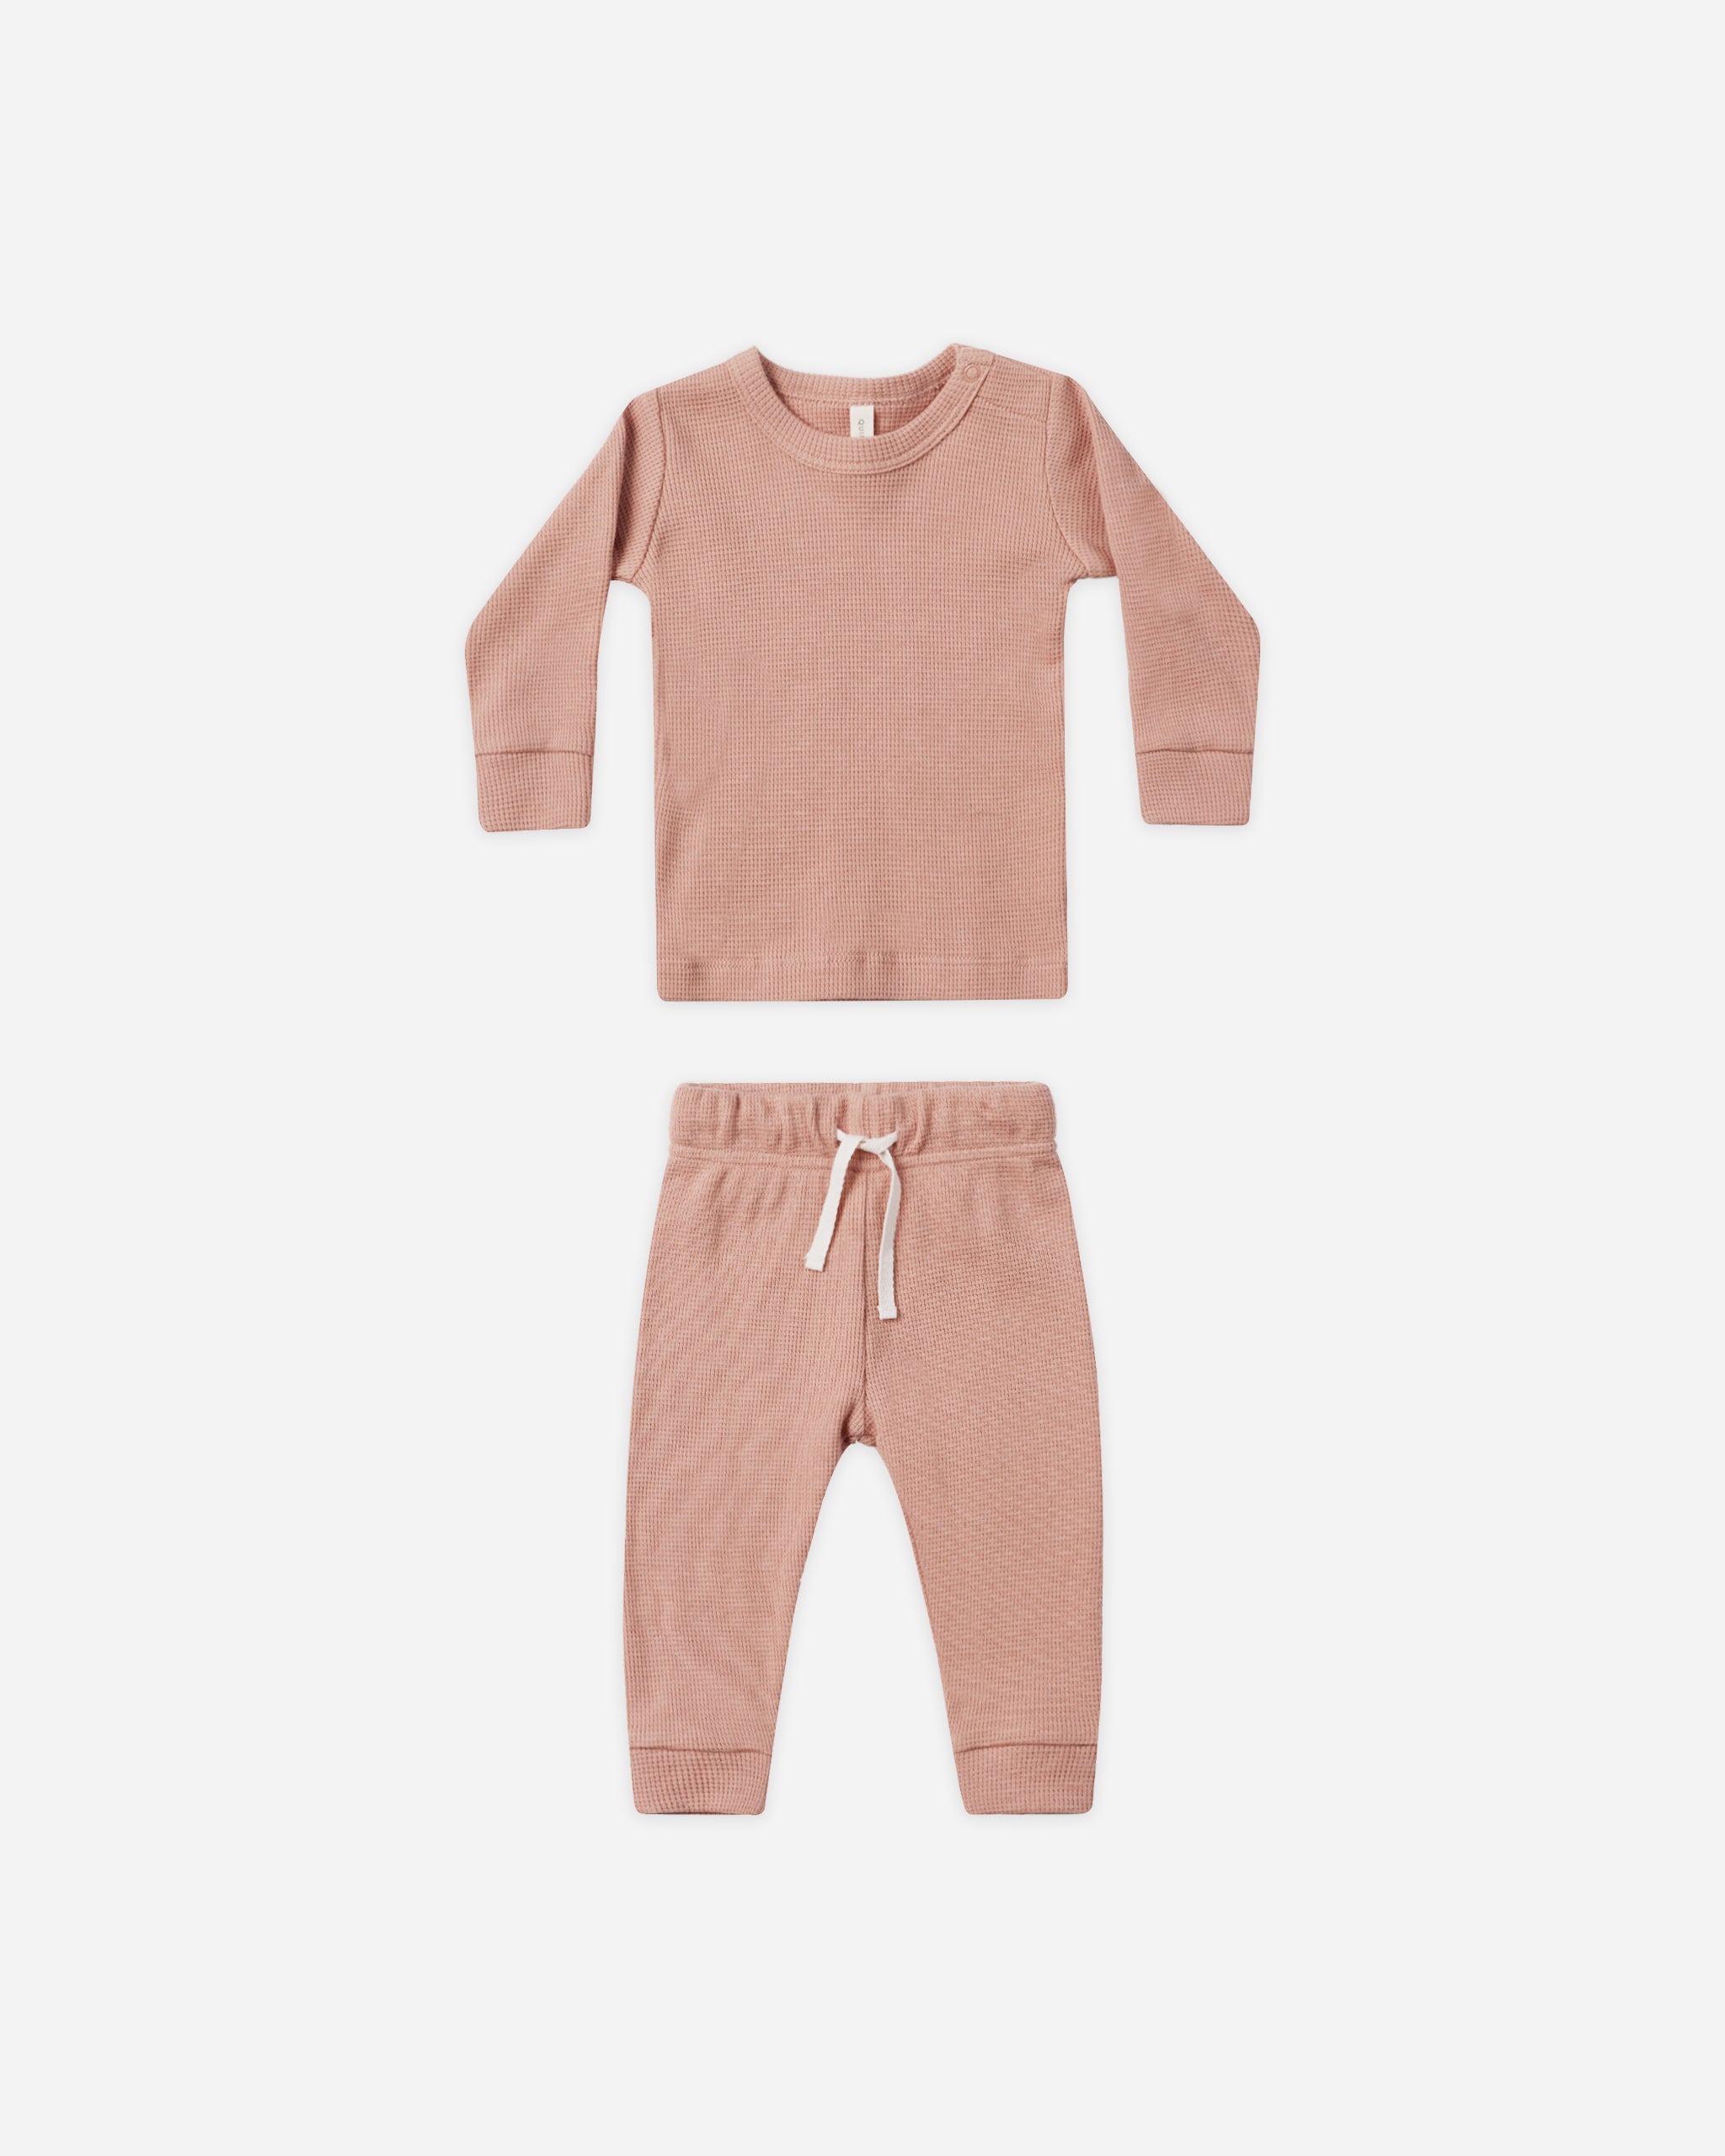 Waffle Top + Pant Set || Rose - Rylee + Cru | Kids Clothes | Trendy Baby Clothes | Modern Infant Outfits |